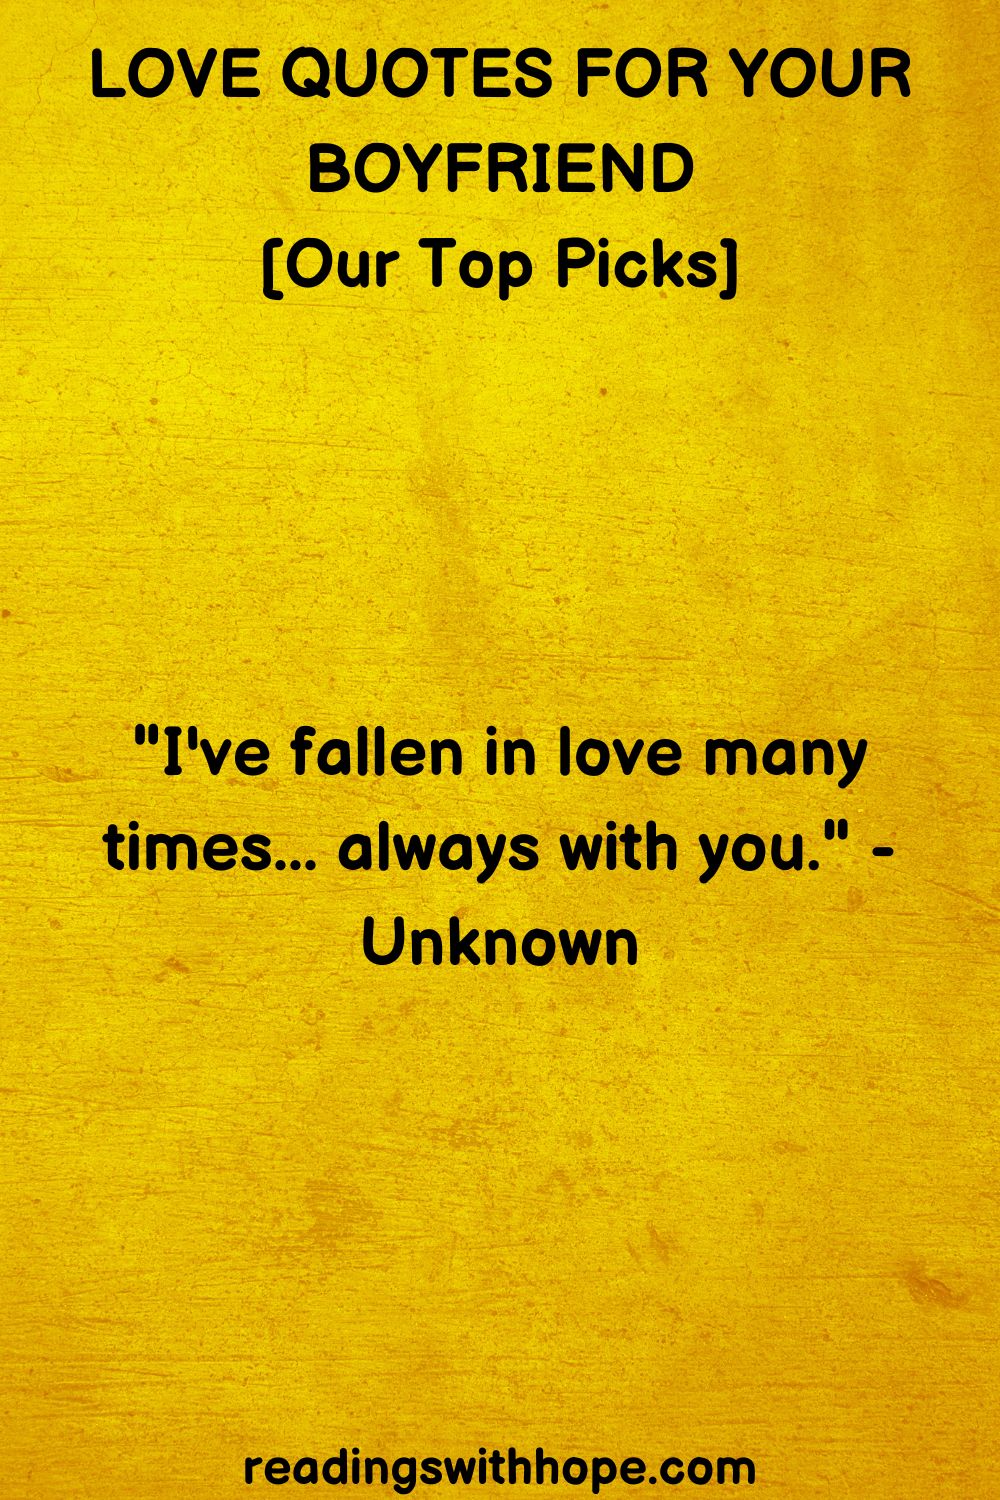 Love Quotes for Your Boyfriend